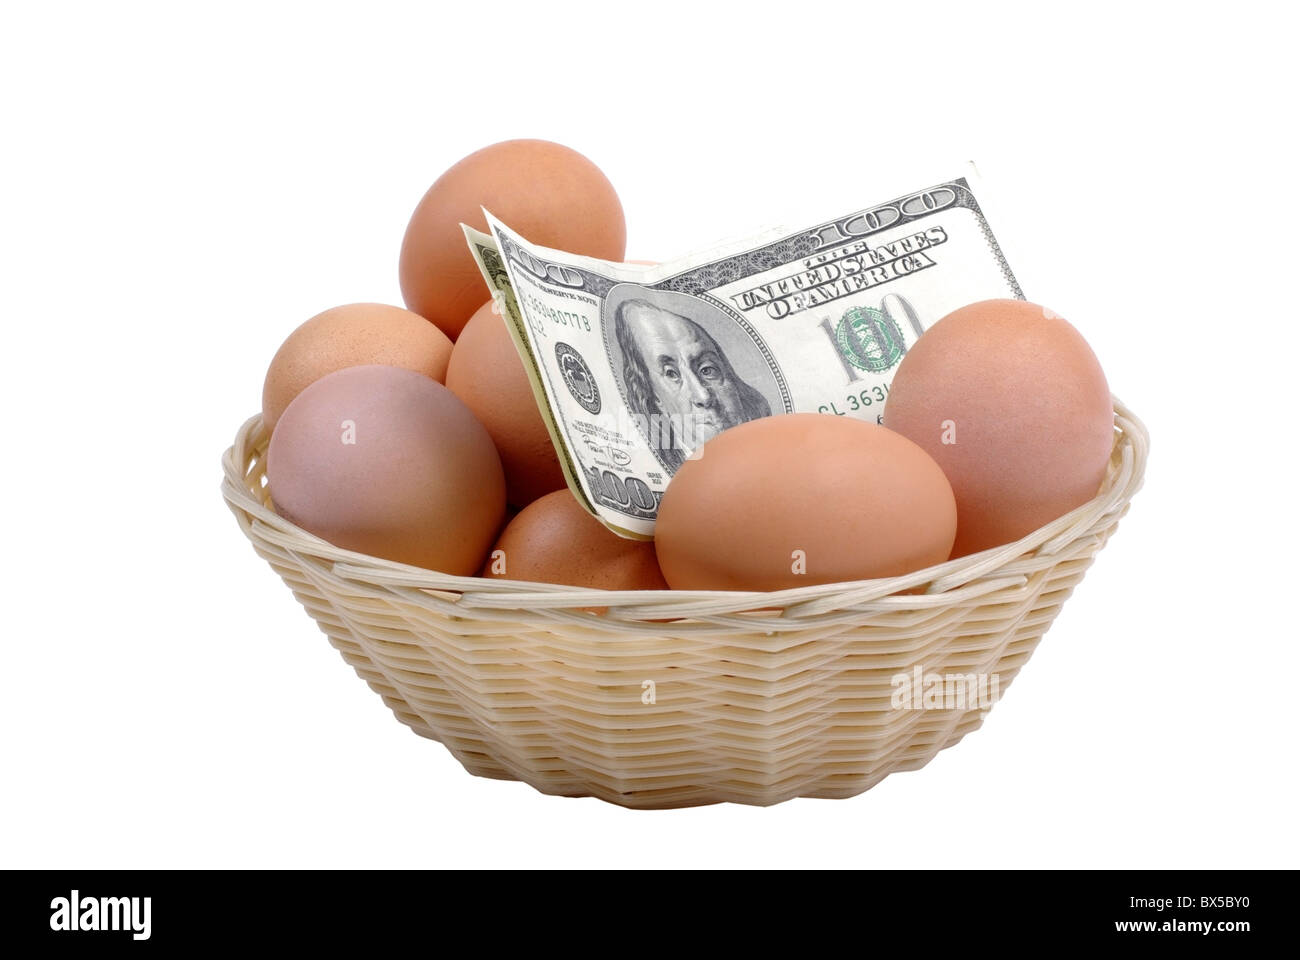 Eggs with dollars in basket isolated on white background. Financial concept. Stock Photo